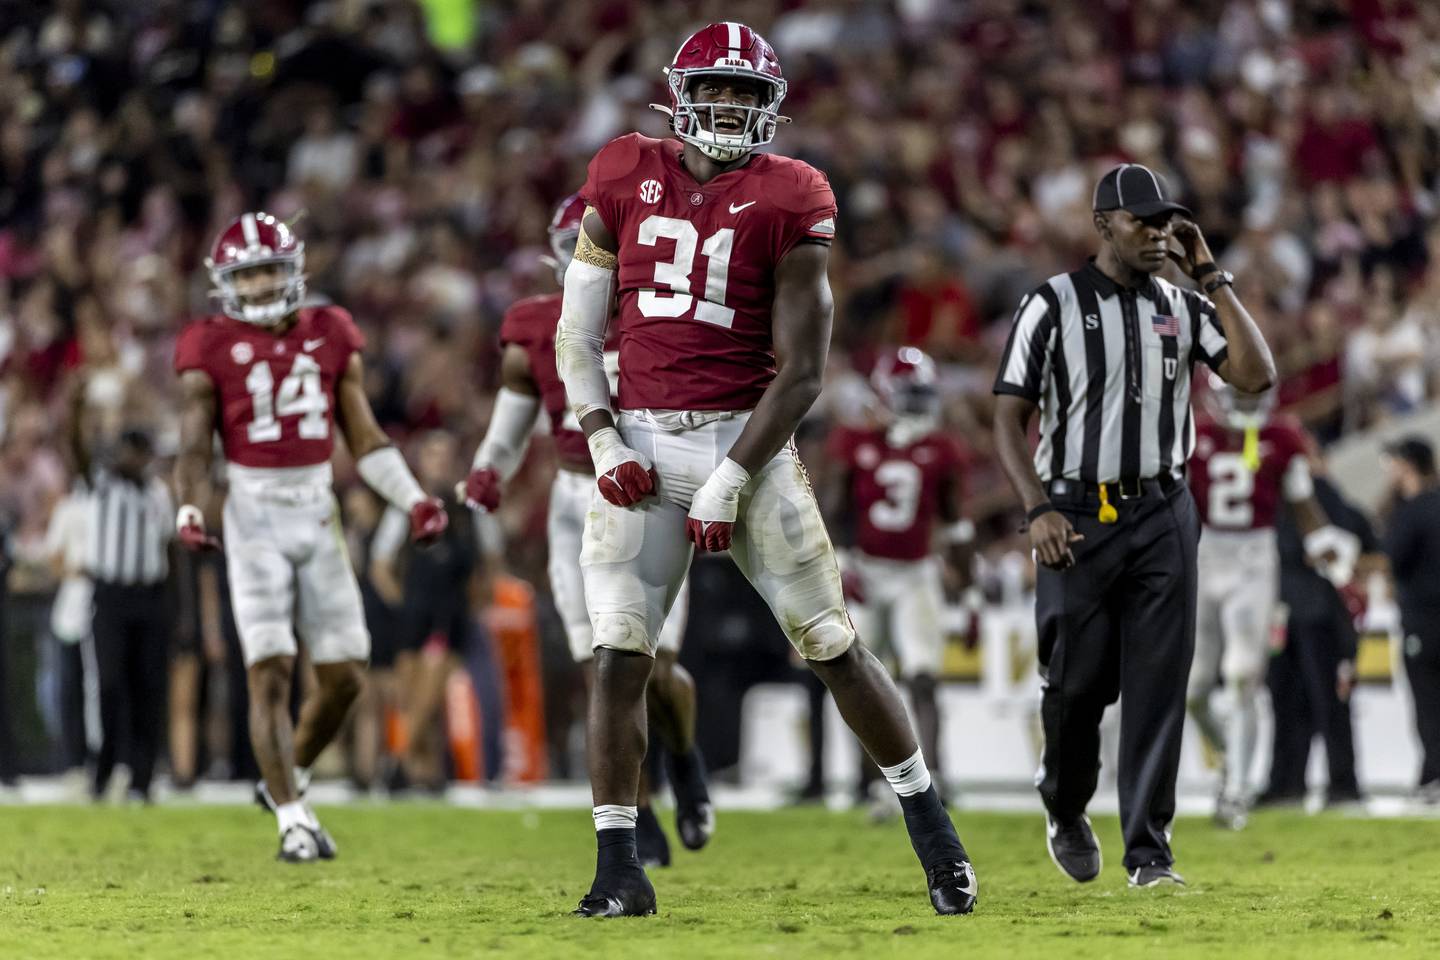 Alabama edge rusher Will Anderson Jr. celebrates a sack against Vanderbilt on Sept. 24 in Tuscaloosa, Ala. Anderson is projected to be a top-five pick in the 2023 NFL draft.